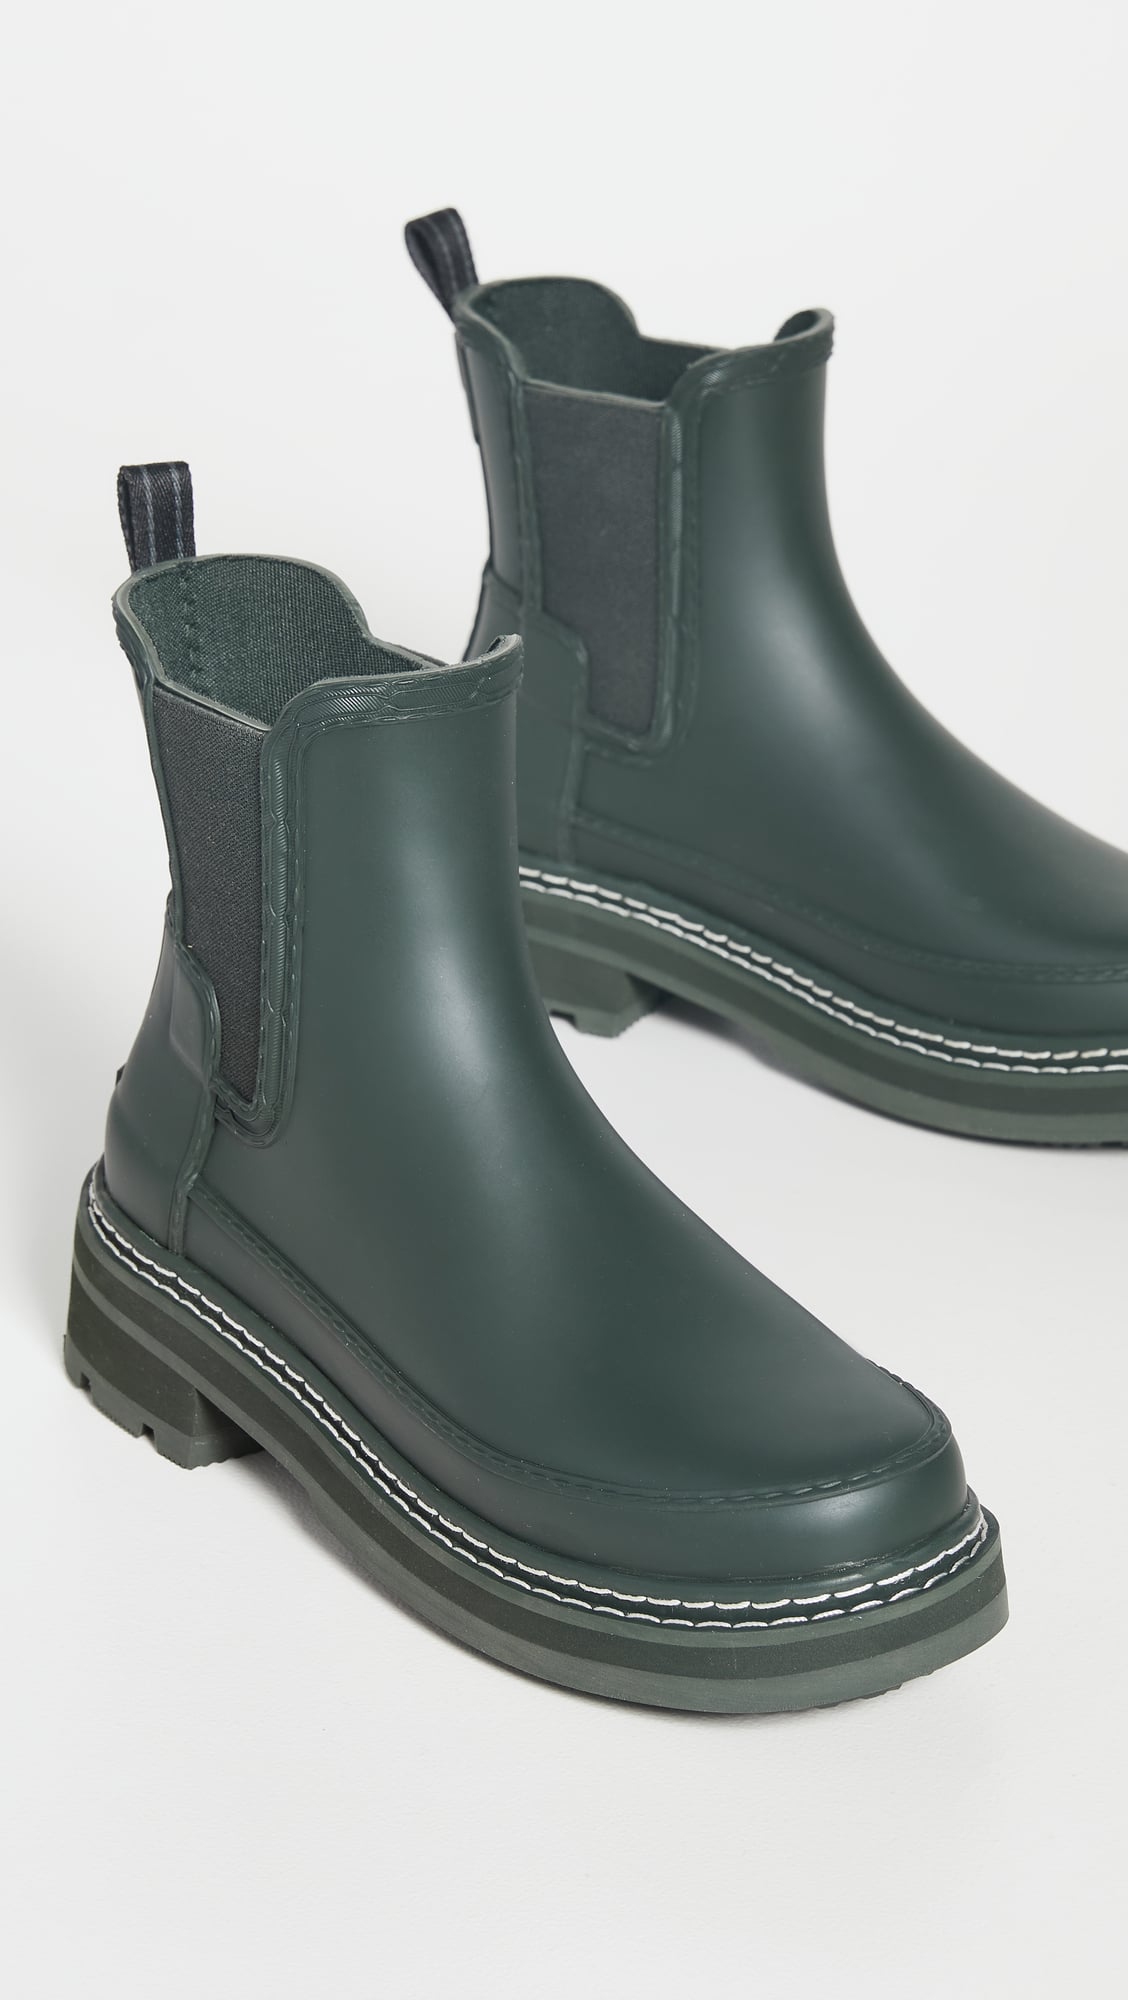 Forberedende navn krigsskib Furnace A Cute Rain Boot: Hunter Boots Refined Stitch Chelsea Boots | 17 Cool Chelsea  Boots We Can't Stop Thinking About Buying This Fall | POPSUGAR Fashion  Photo 17